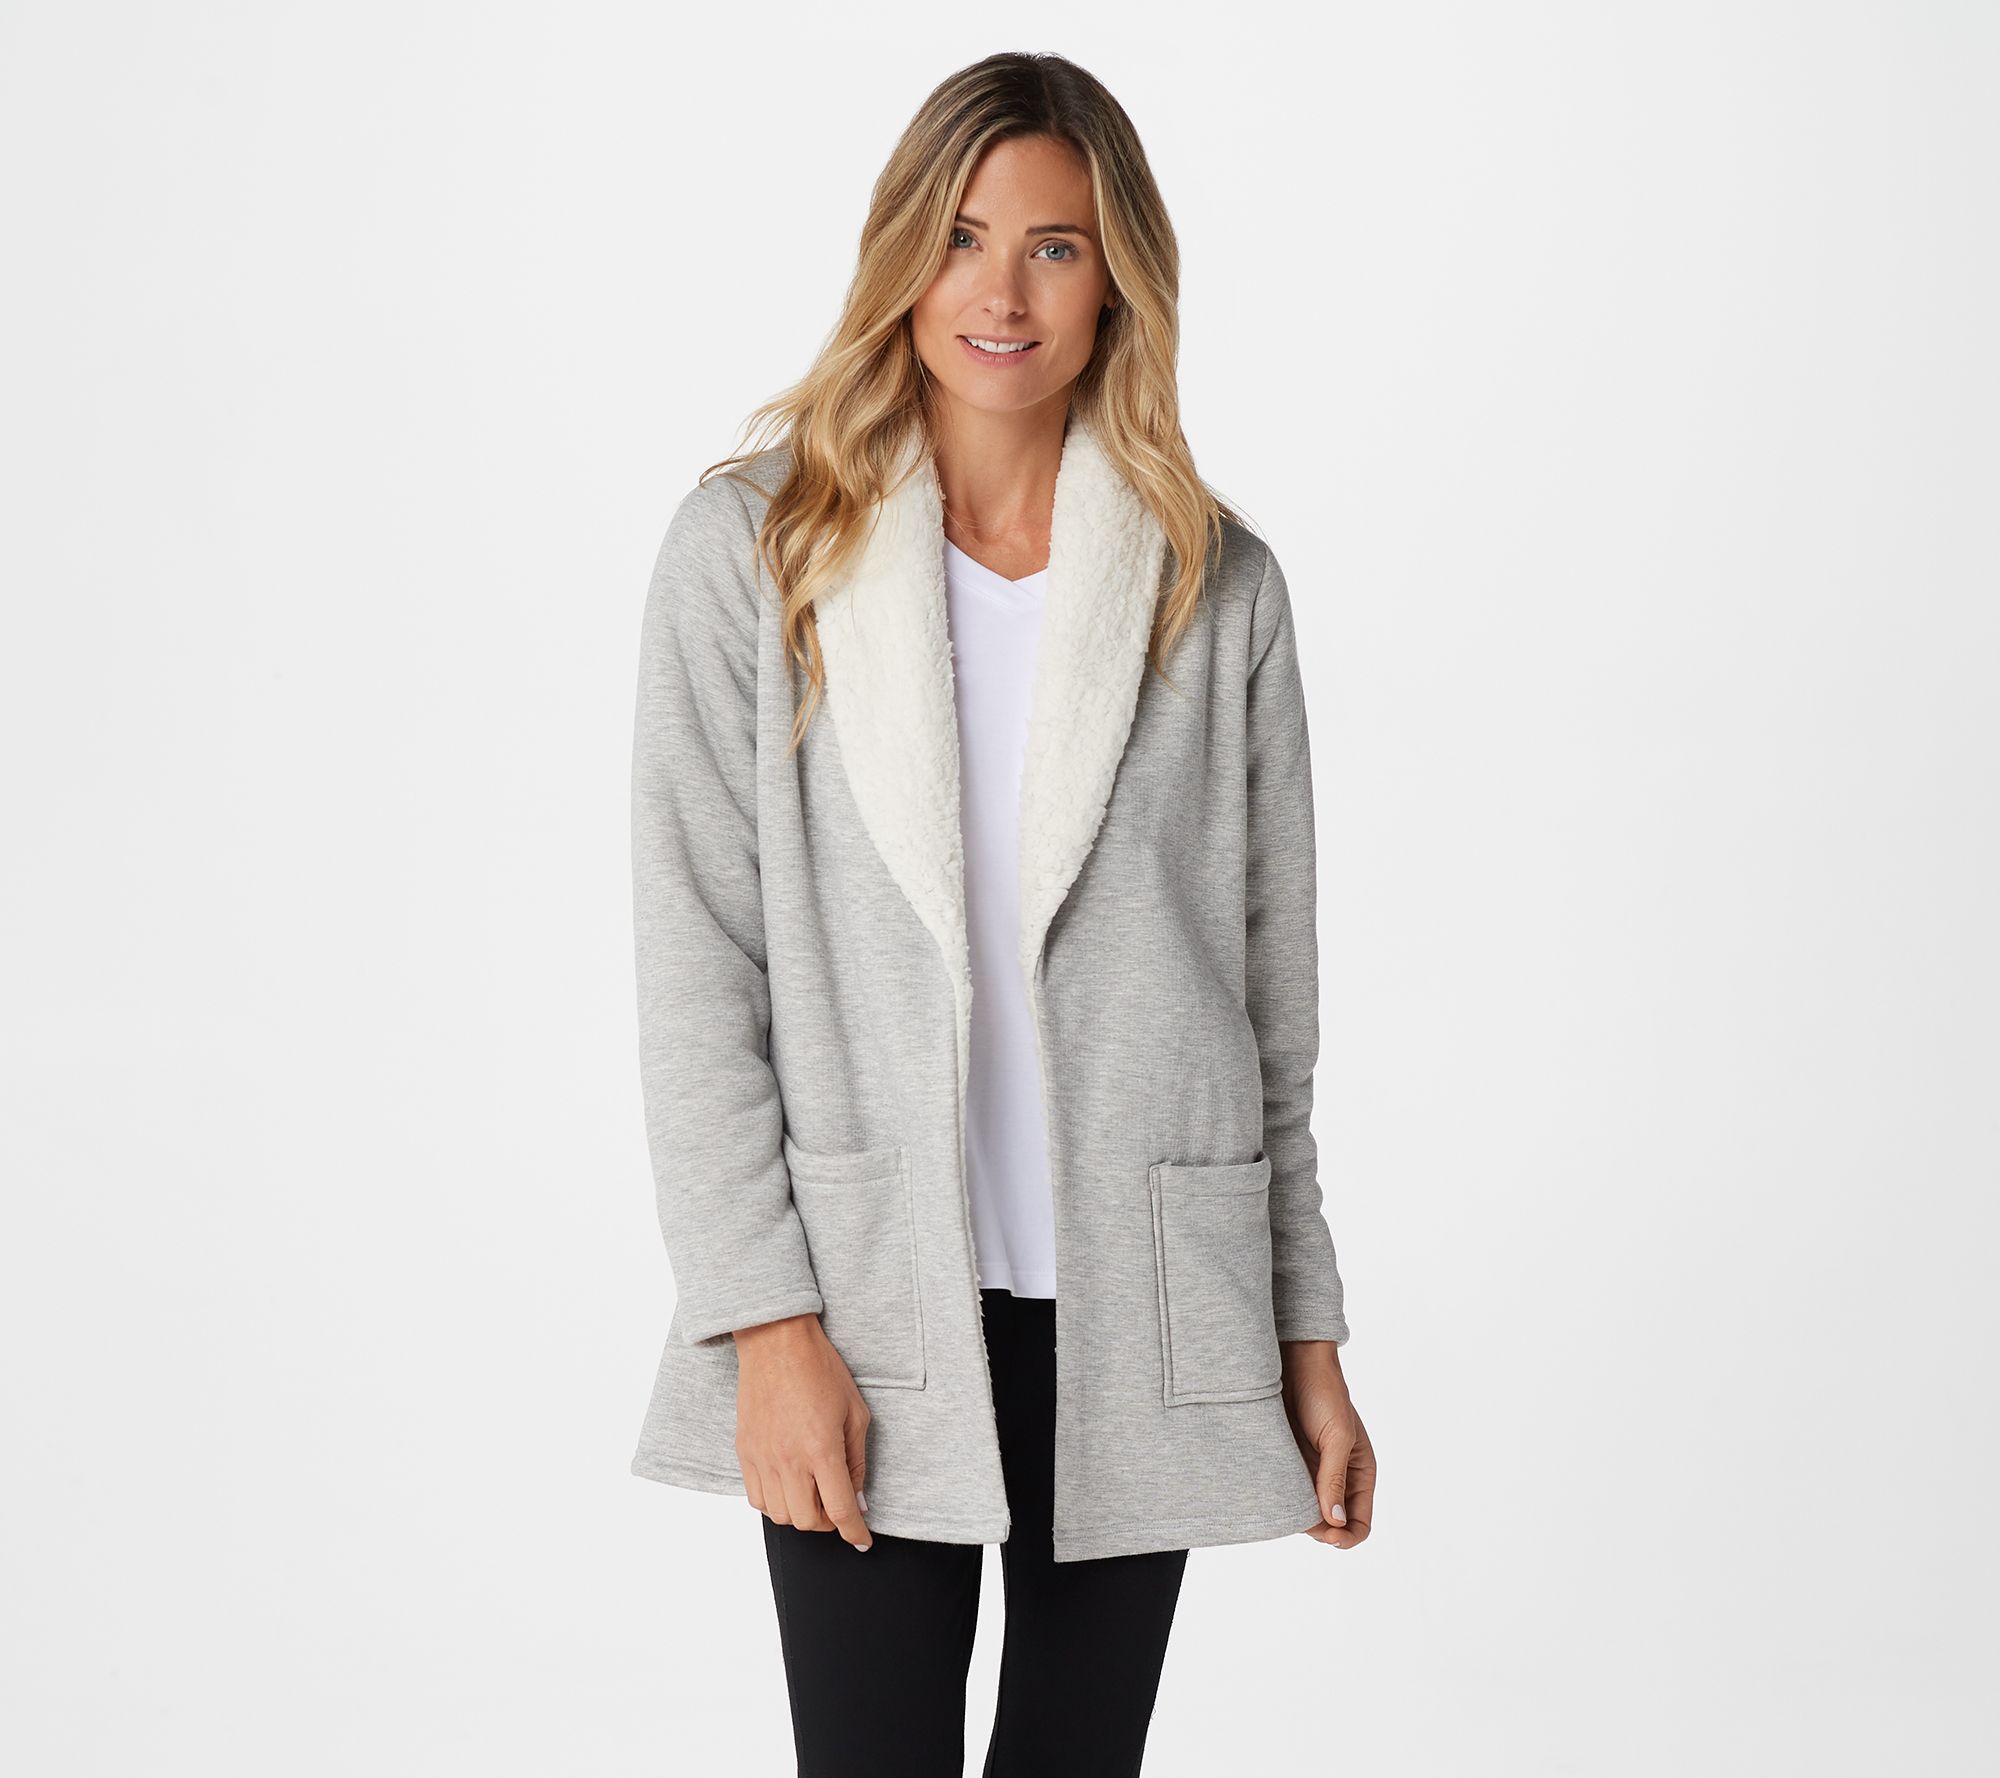 Denim & Co. Active Jersey Bonded w/ Sherpa Open Front Cardigan - QVC.com